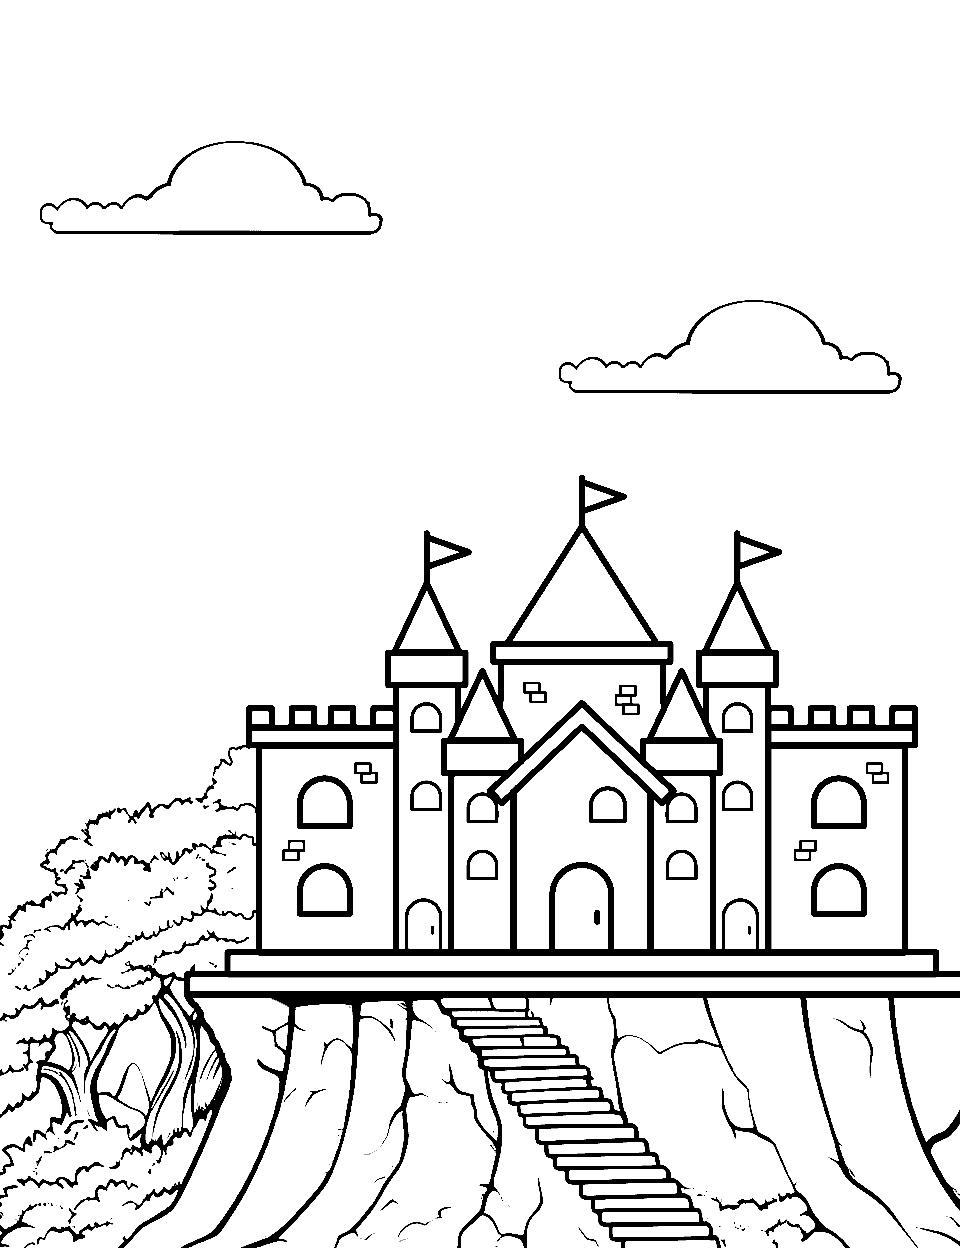 Majestic Castle View Coloring Page - A huge detailed castle on top of a mountain.